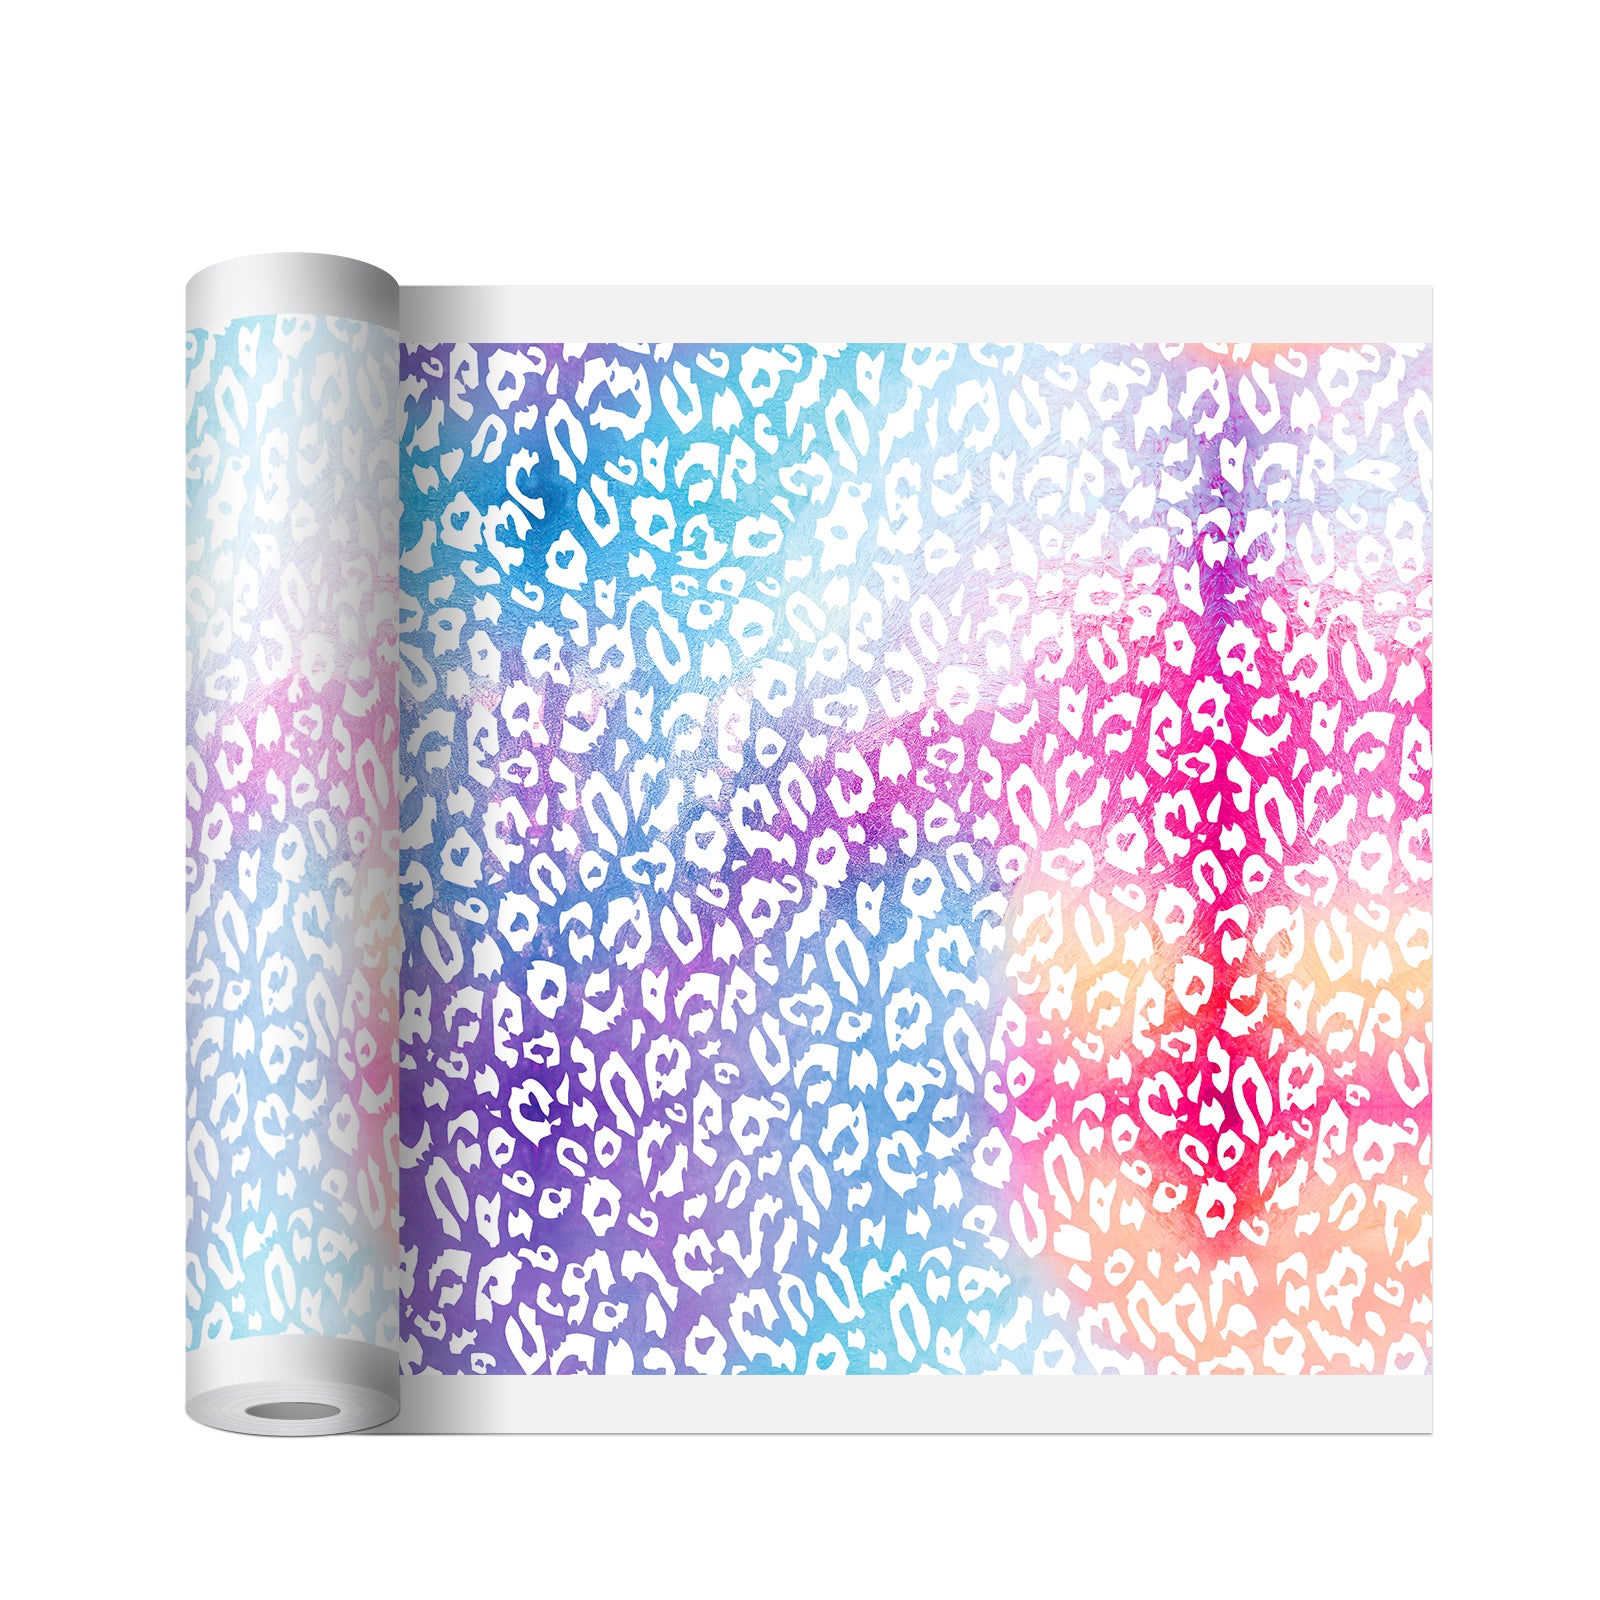 Sublimation Pattern Paper Modern Crack Series (4 Design Options) Roll Size 15 in x 40 ft 15 in x 40 ft / Purple Ripple / Hydro Transfer Paper 30 Gram